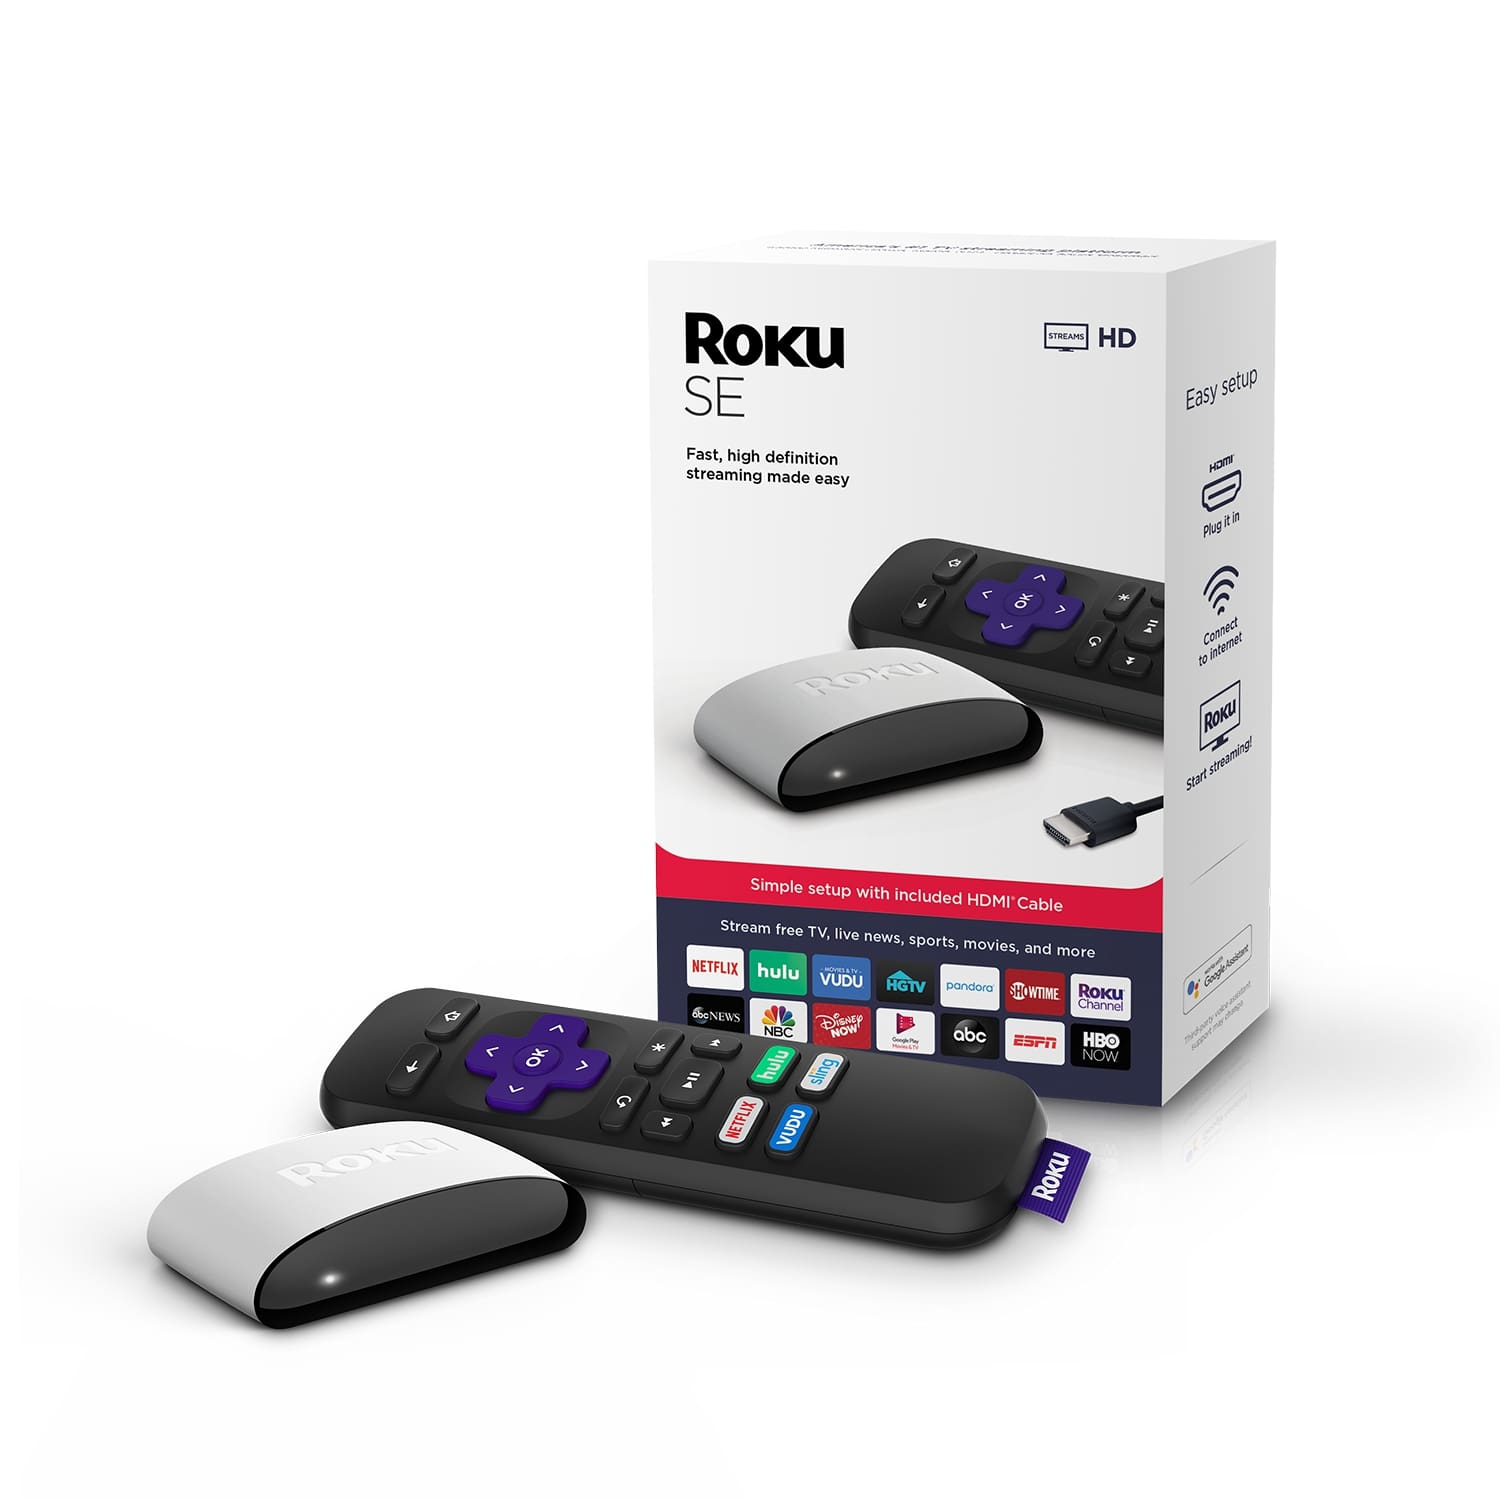 Roku Black Friday 2019 deals include Walmart-exclusive TV and streaming player – BGR